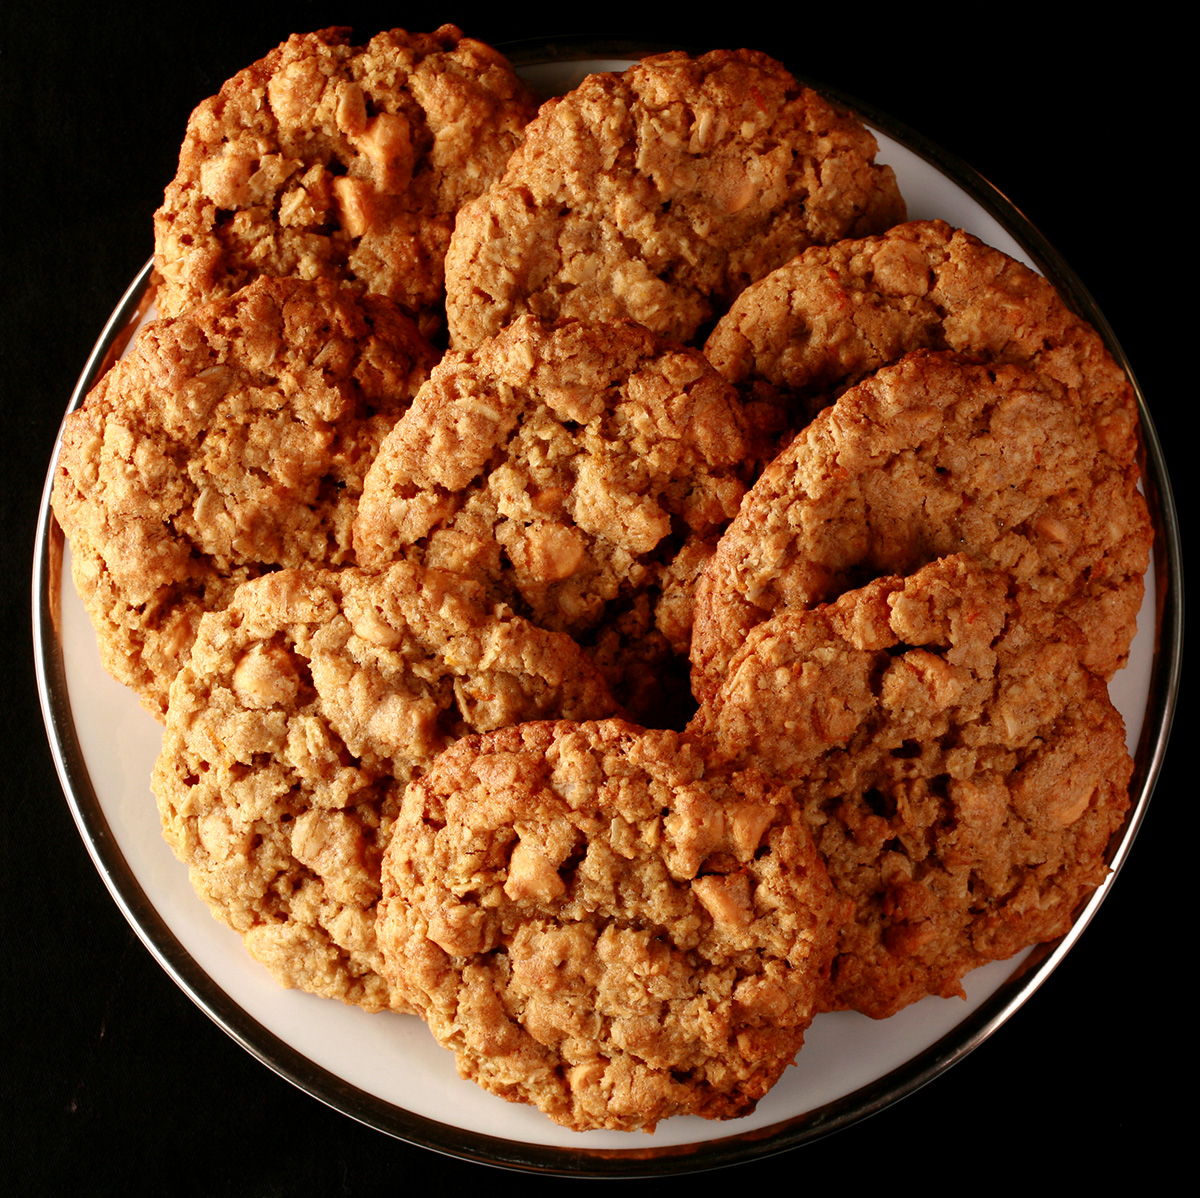 Close up photo of a plate of oatmeal cookies with visible butterscotch chips